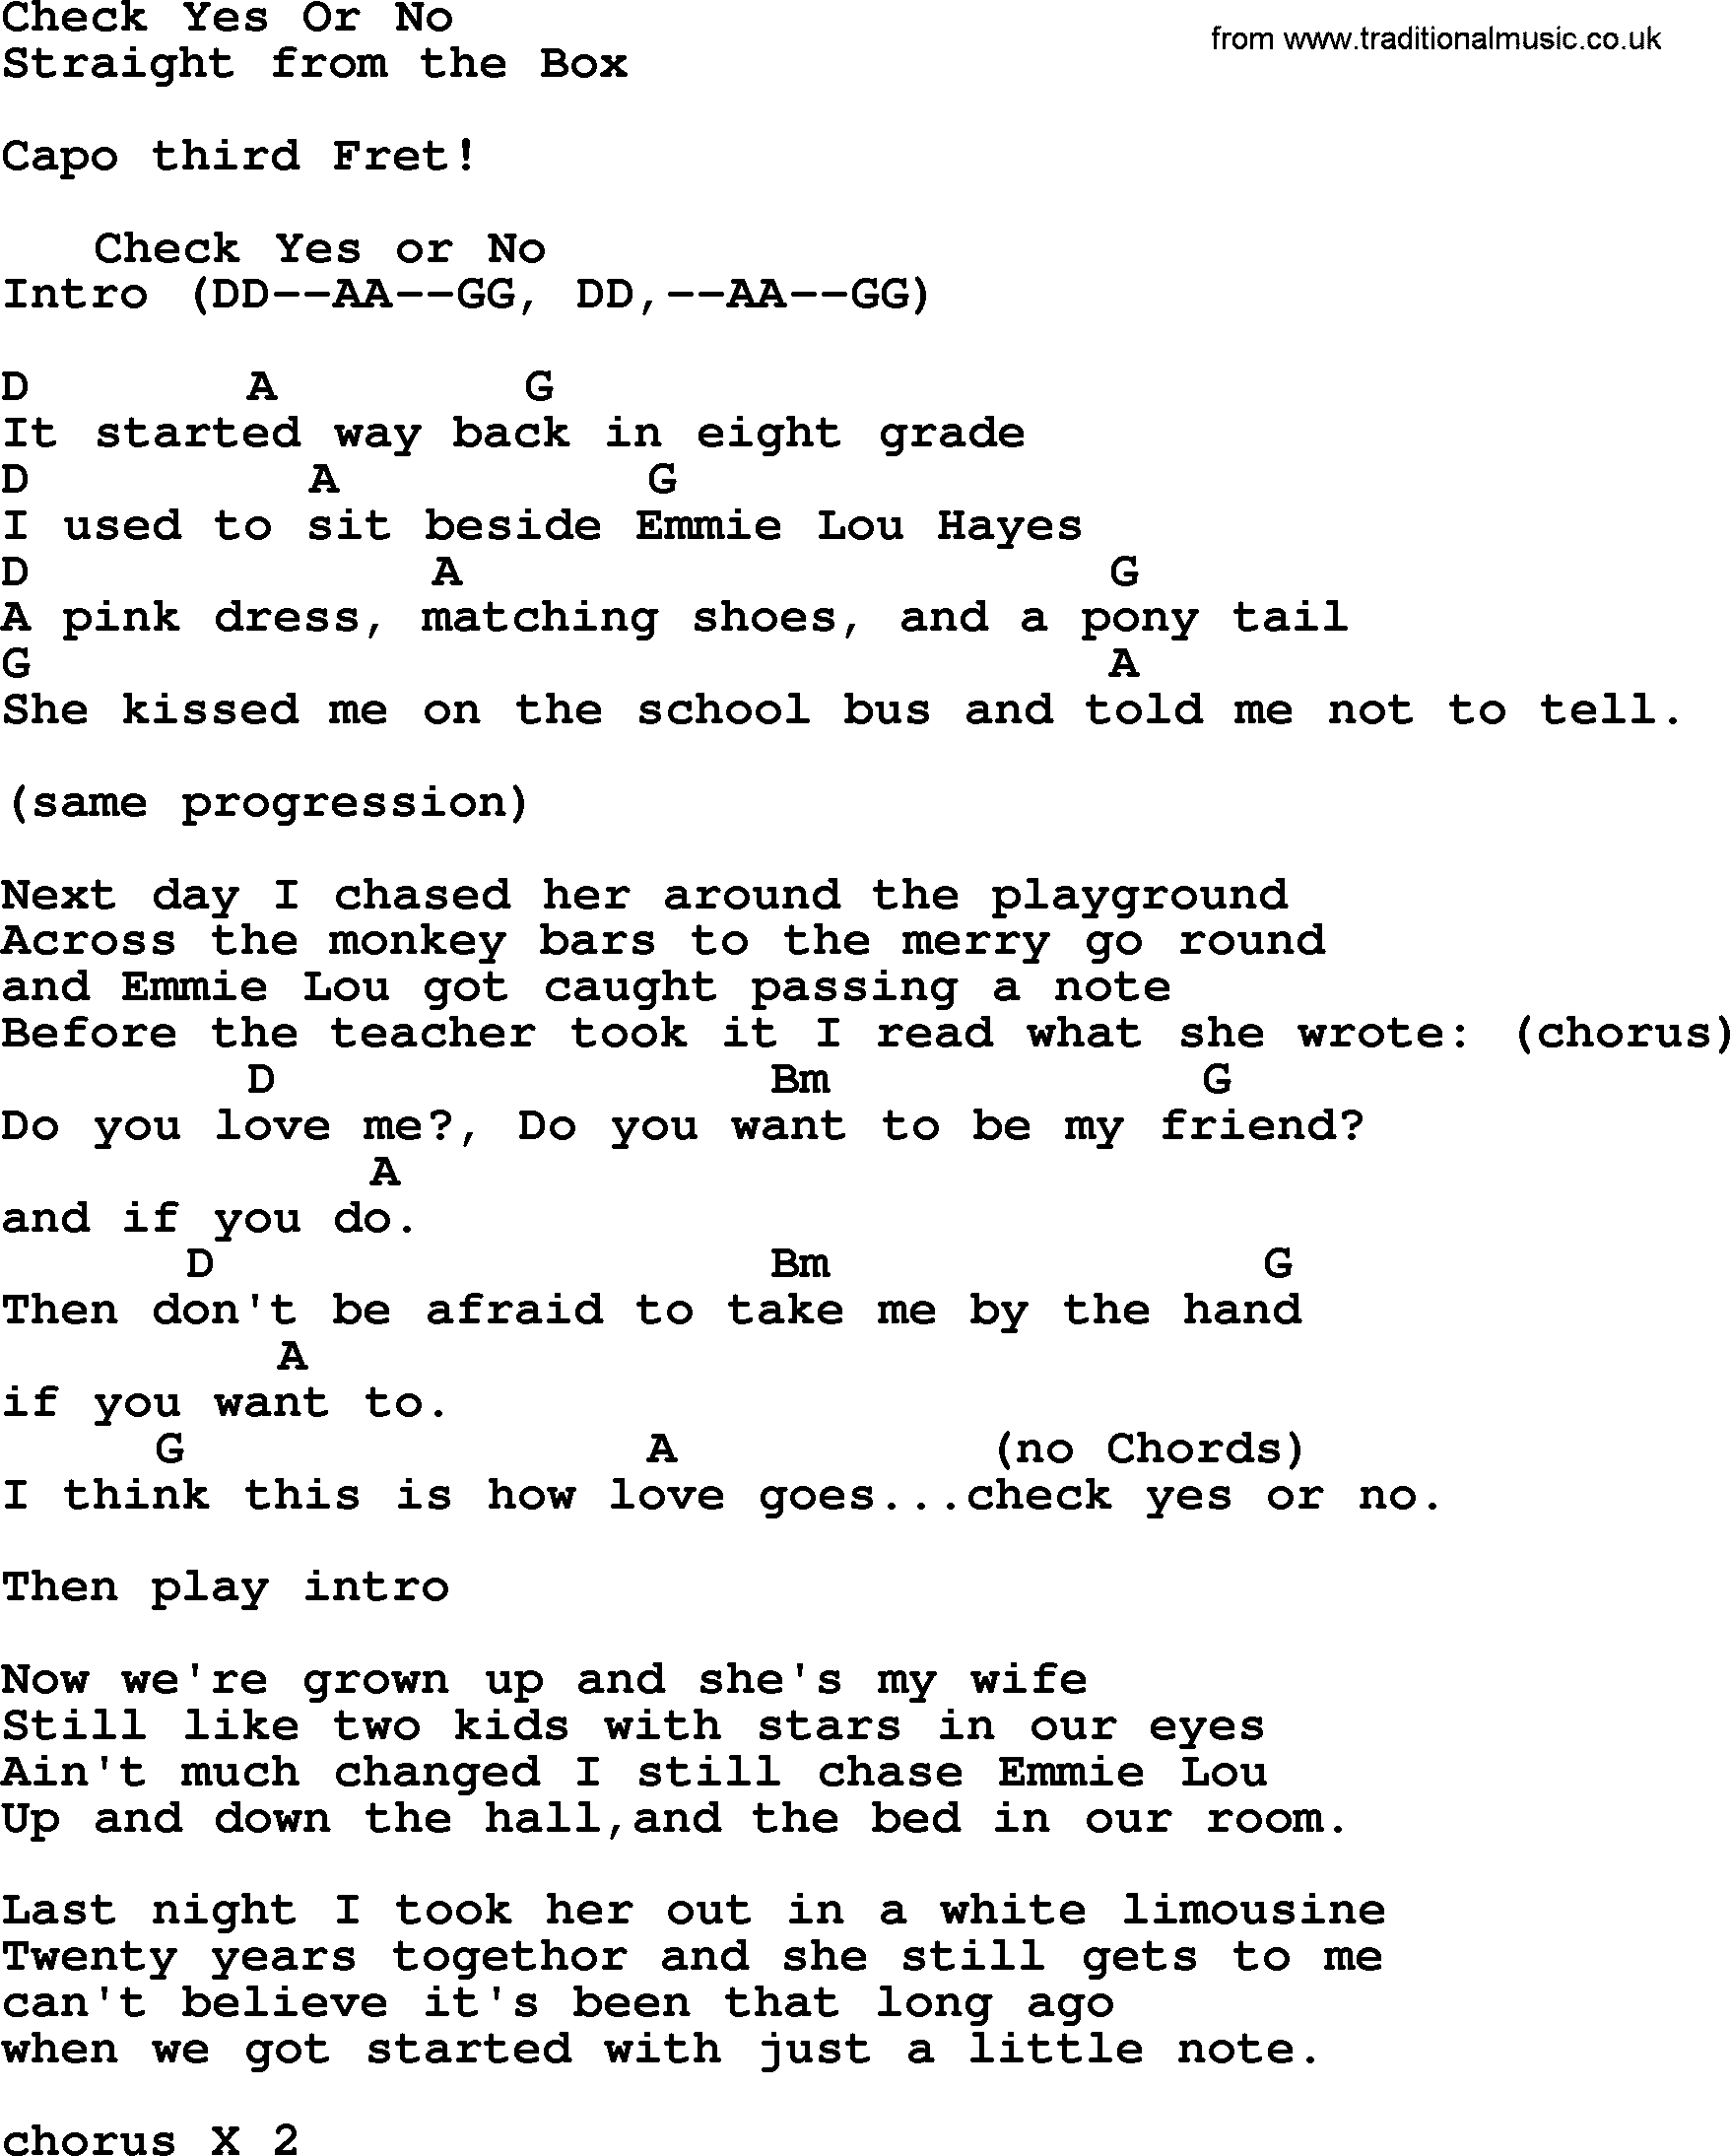 Check Yes Or No, by George Strait - lyrics and chords.